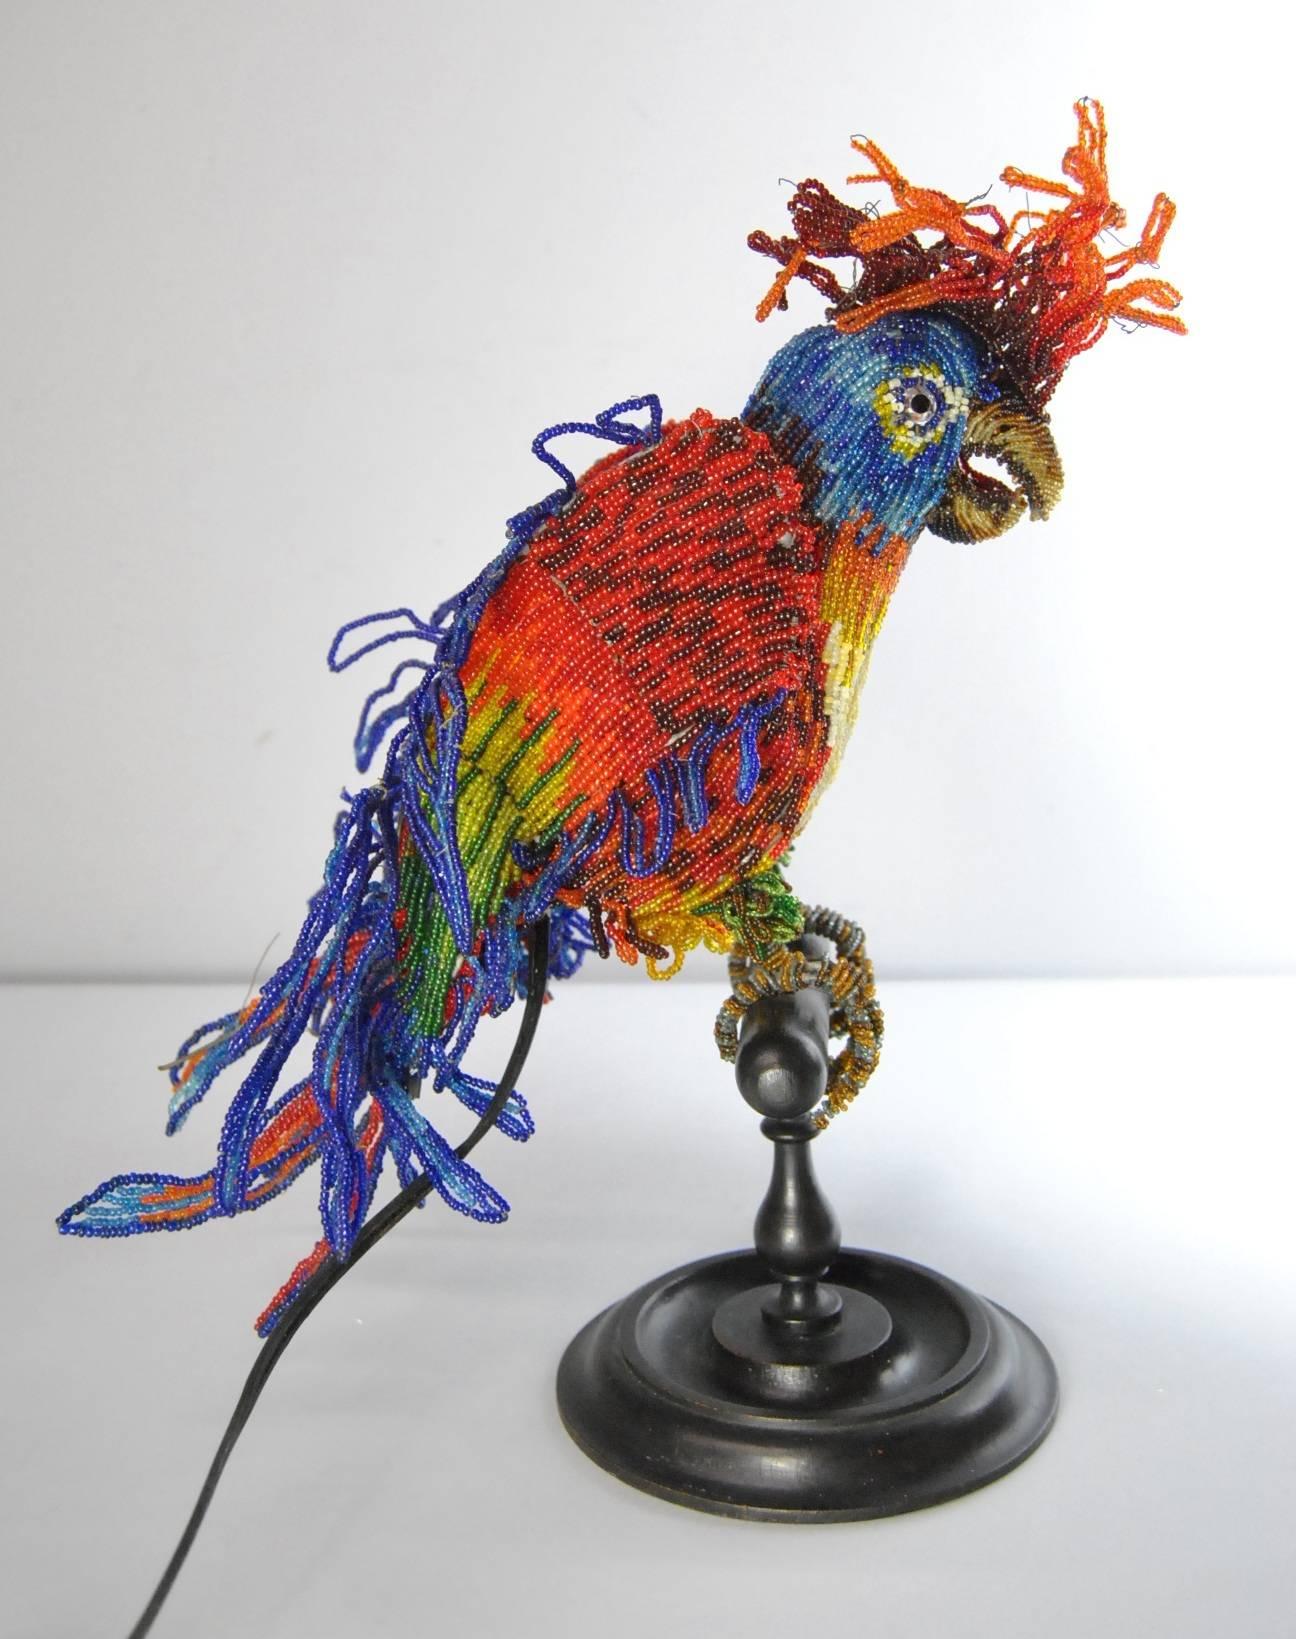 A rare antique beaded parrot bird lamp. A beautiful beaded parrot perched on a turned wood base. This unusual lamp has vivid colors and beautiful glass eyes. A real treasure. It is in good condition though there are some missing beads. The